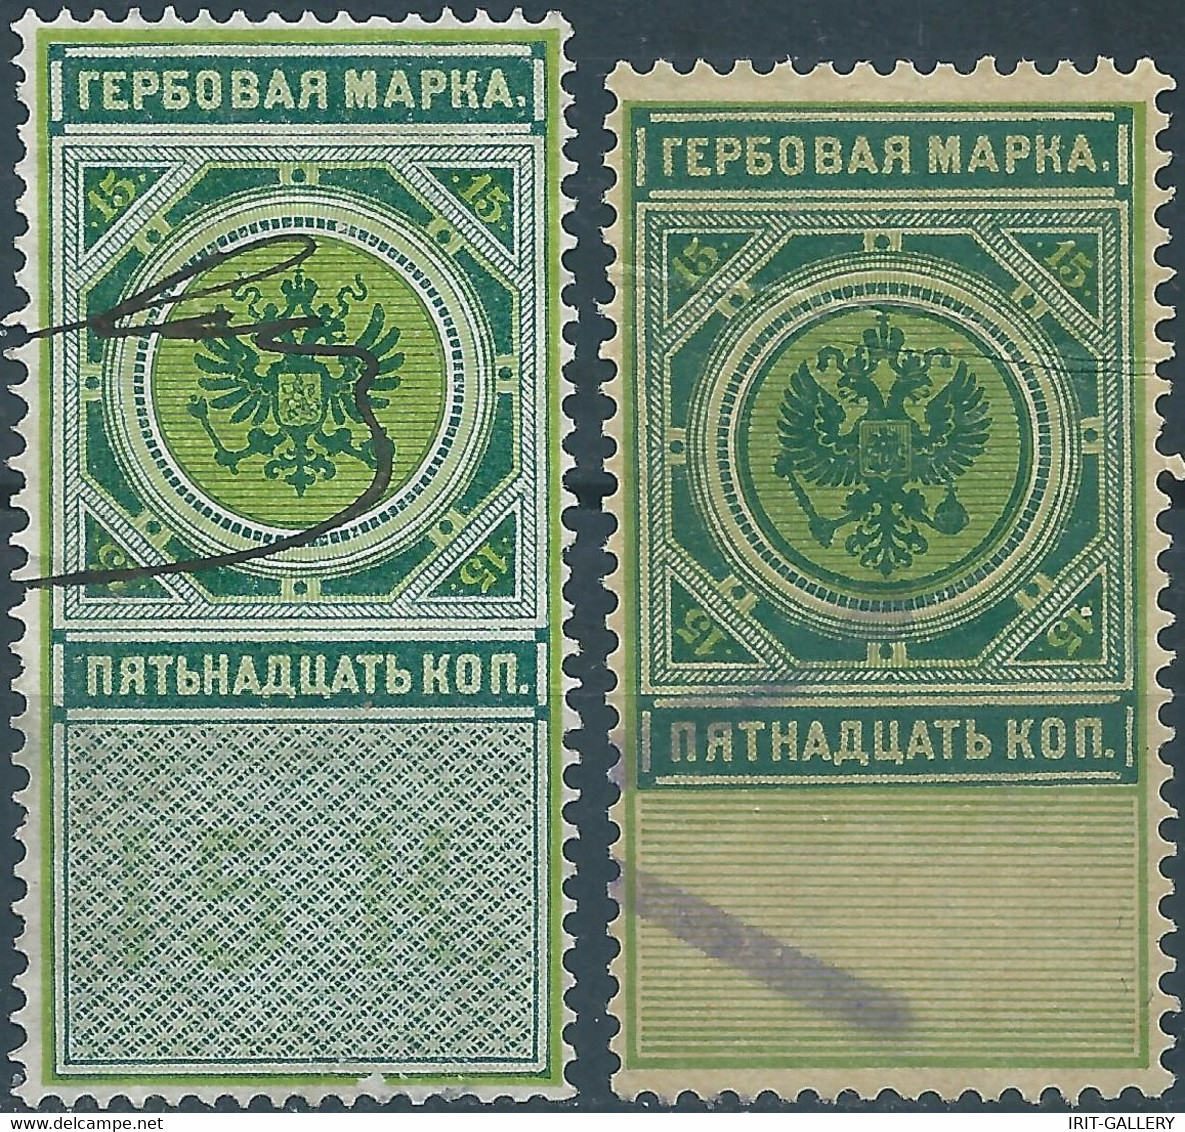 Russia - Russie - Russland,1886-1890 Revenue Stamps Fiscal Tax 15kop,1st And 2nd Issue, Different In Size And Color,used - Revenue Stamps